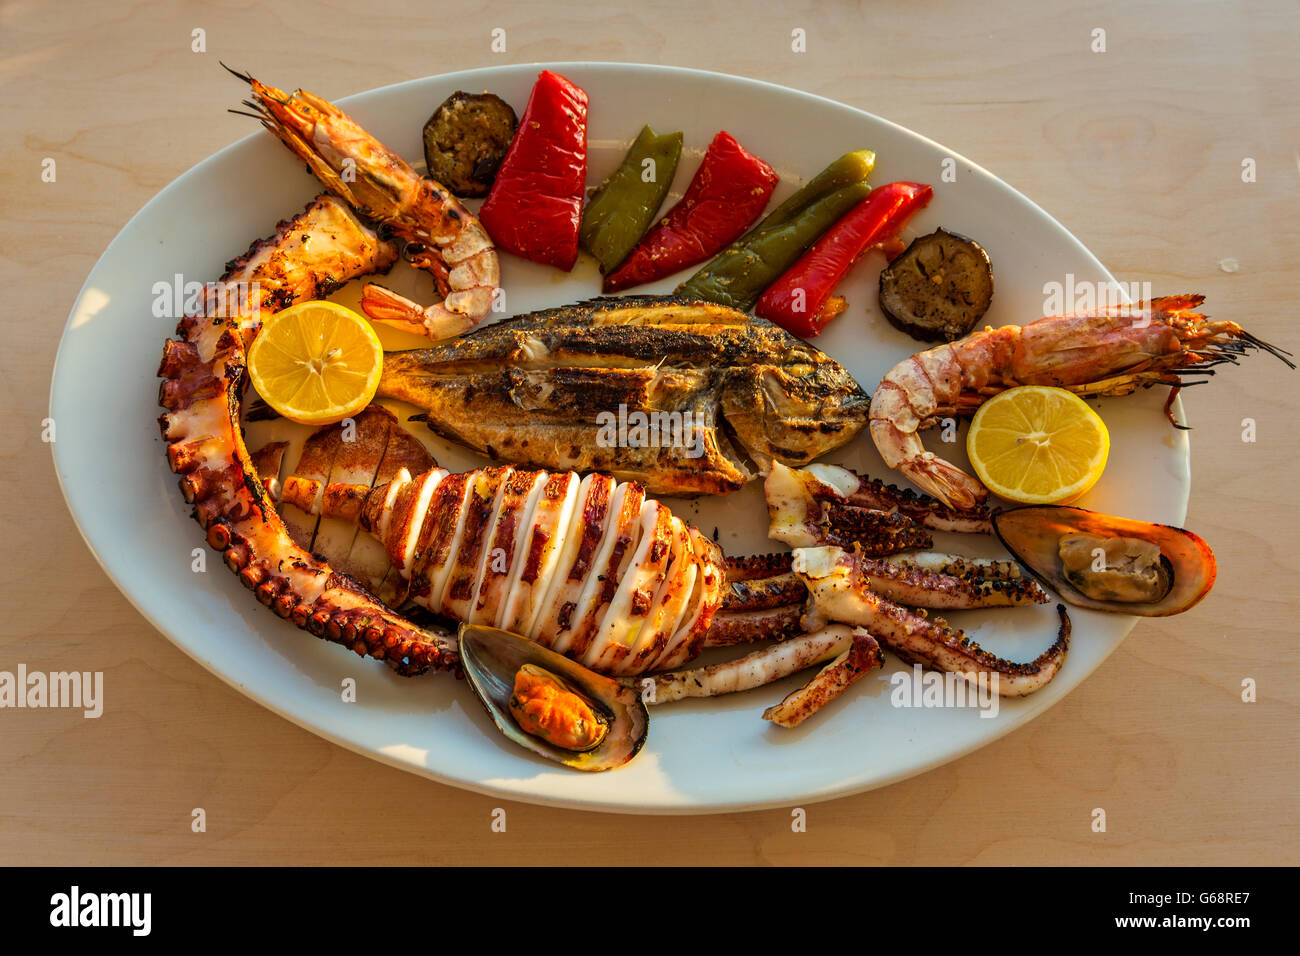 Large platter of fried seafood and vegetables Stock Photo